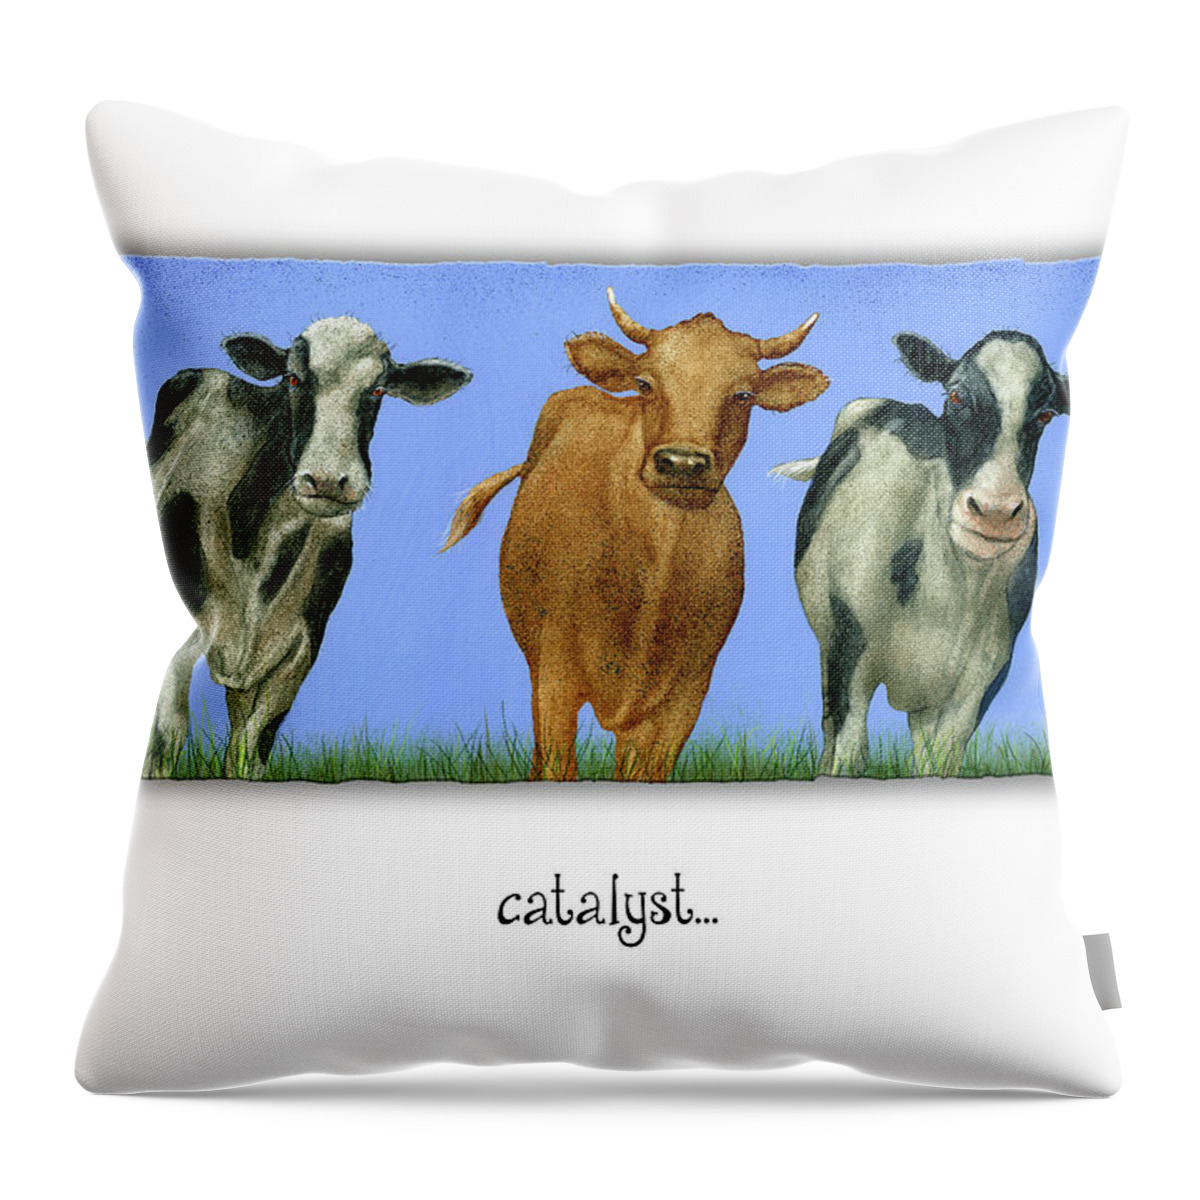 Will Bullas Throw Pillow featuring the painting Catalyst... by Will Bullas